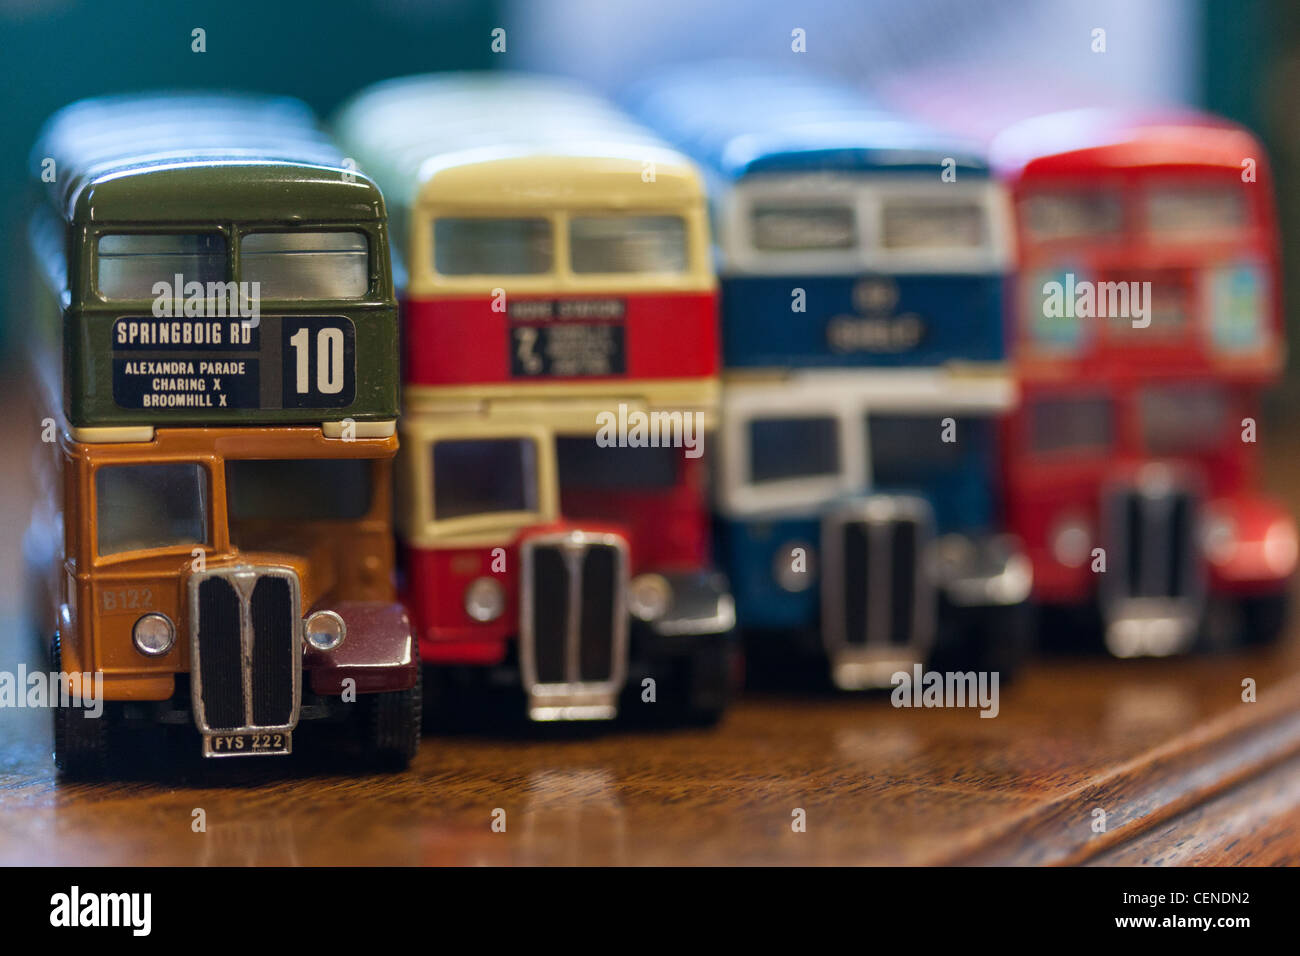 collectors Toy buses for sale on display at an Auction Montrose Scotland. 1960s bus Stock Photo